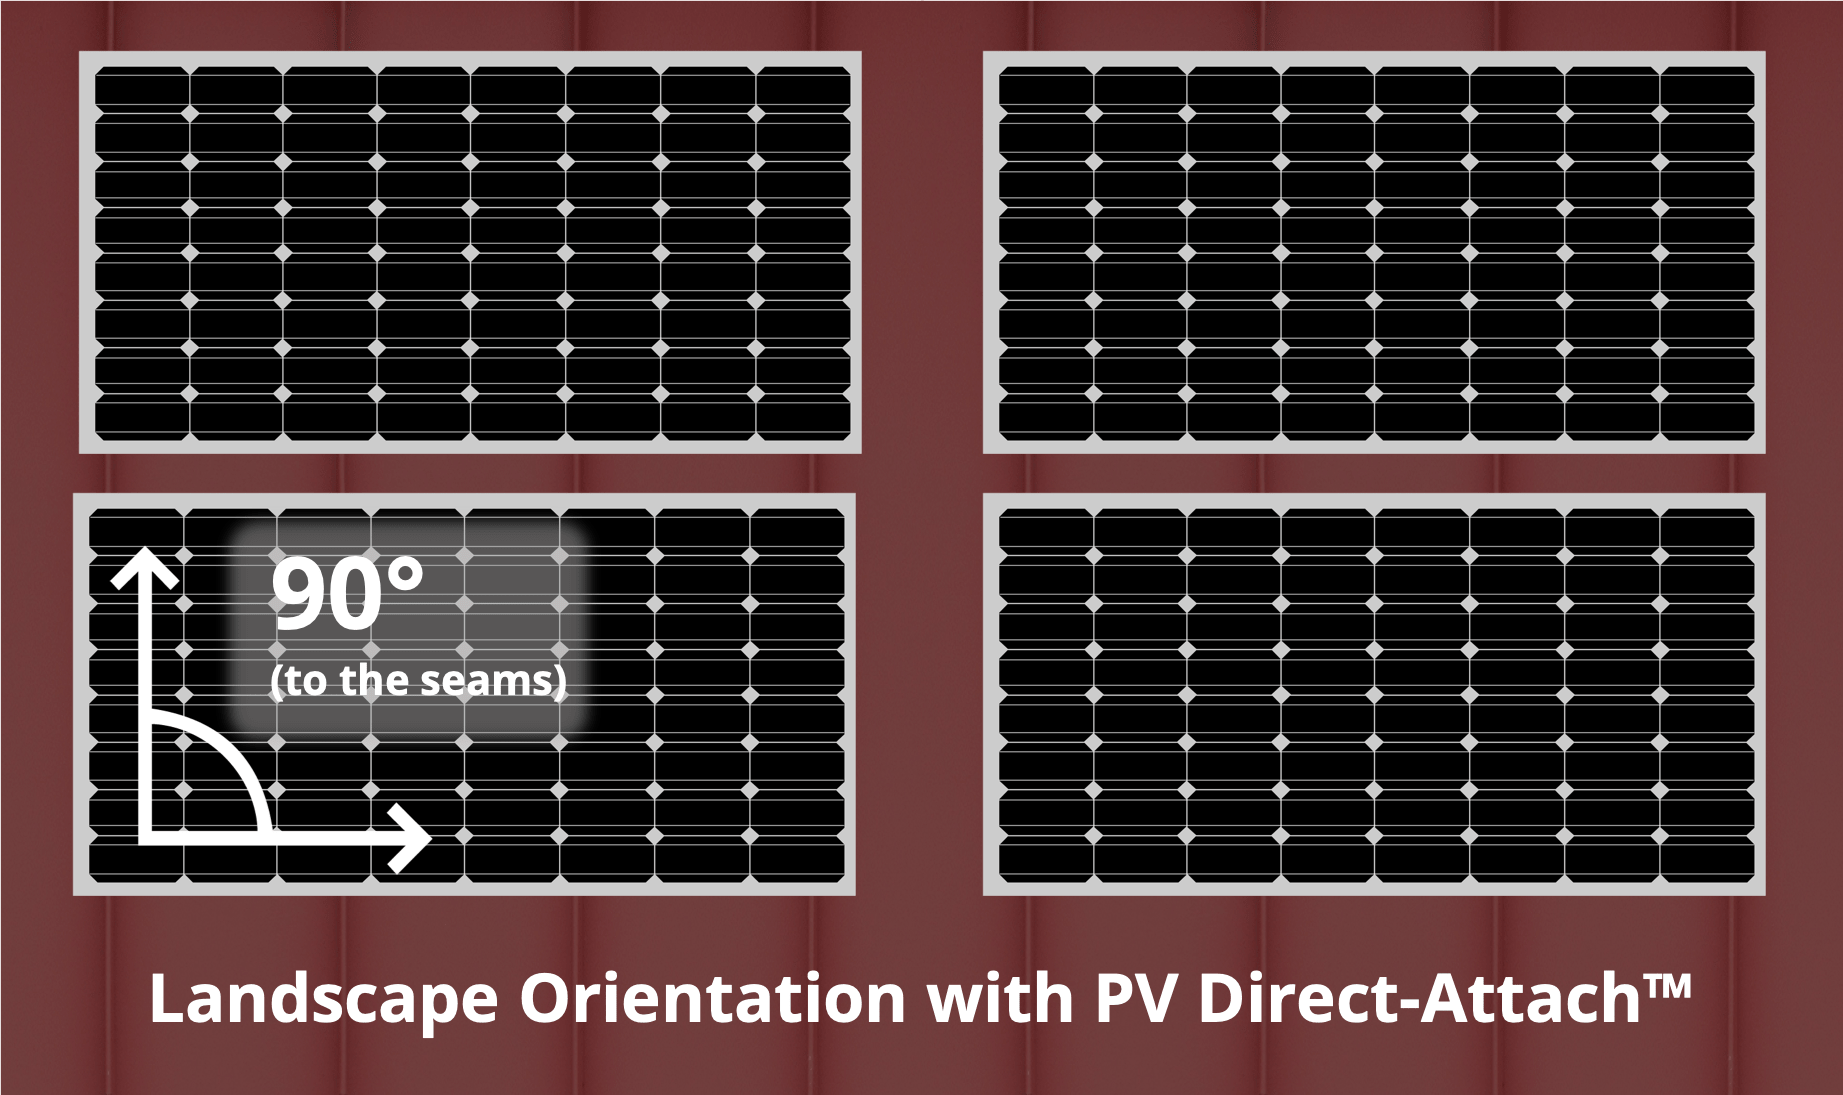 S-5! Landscape Orientation with PV Direct-Attach™